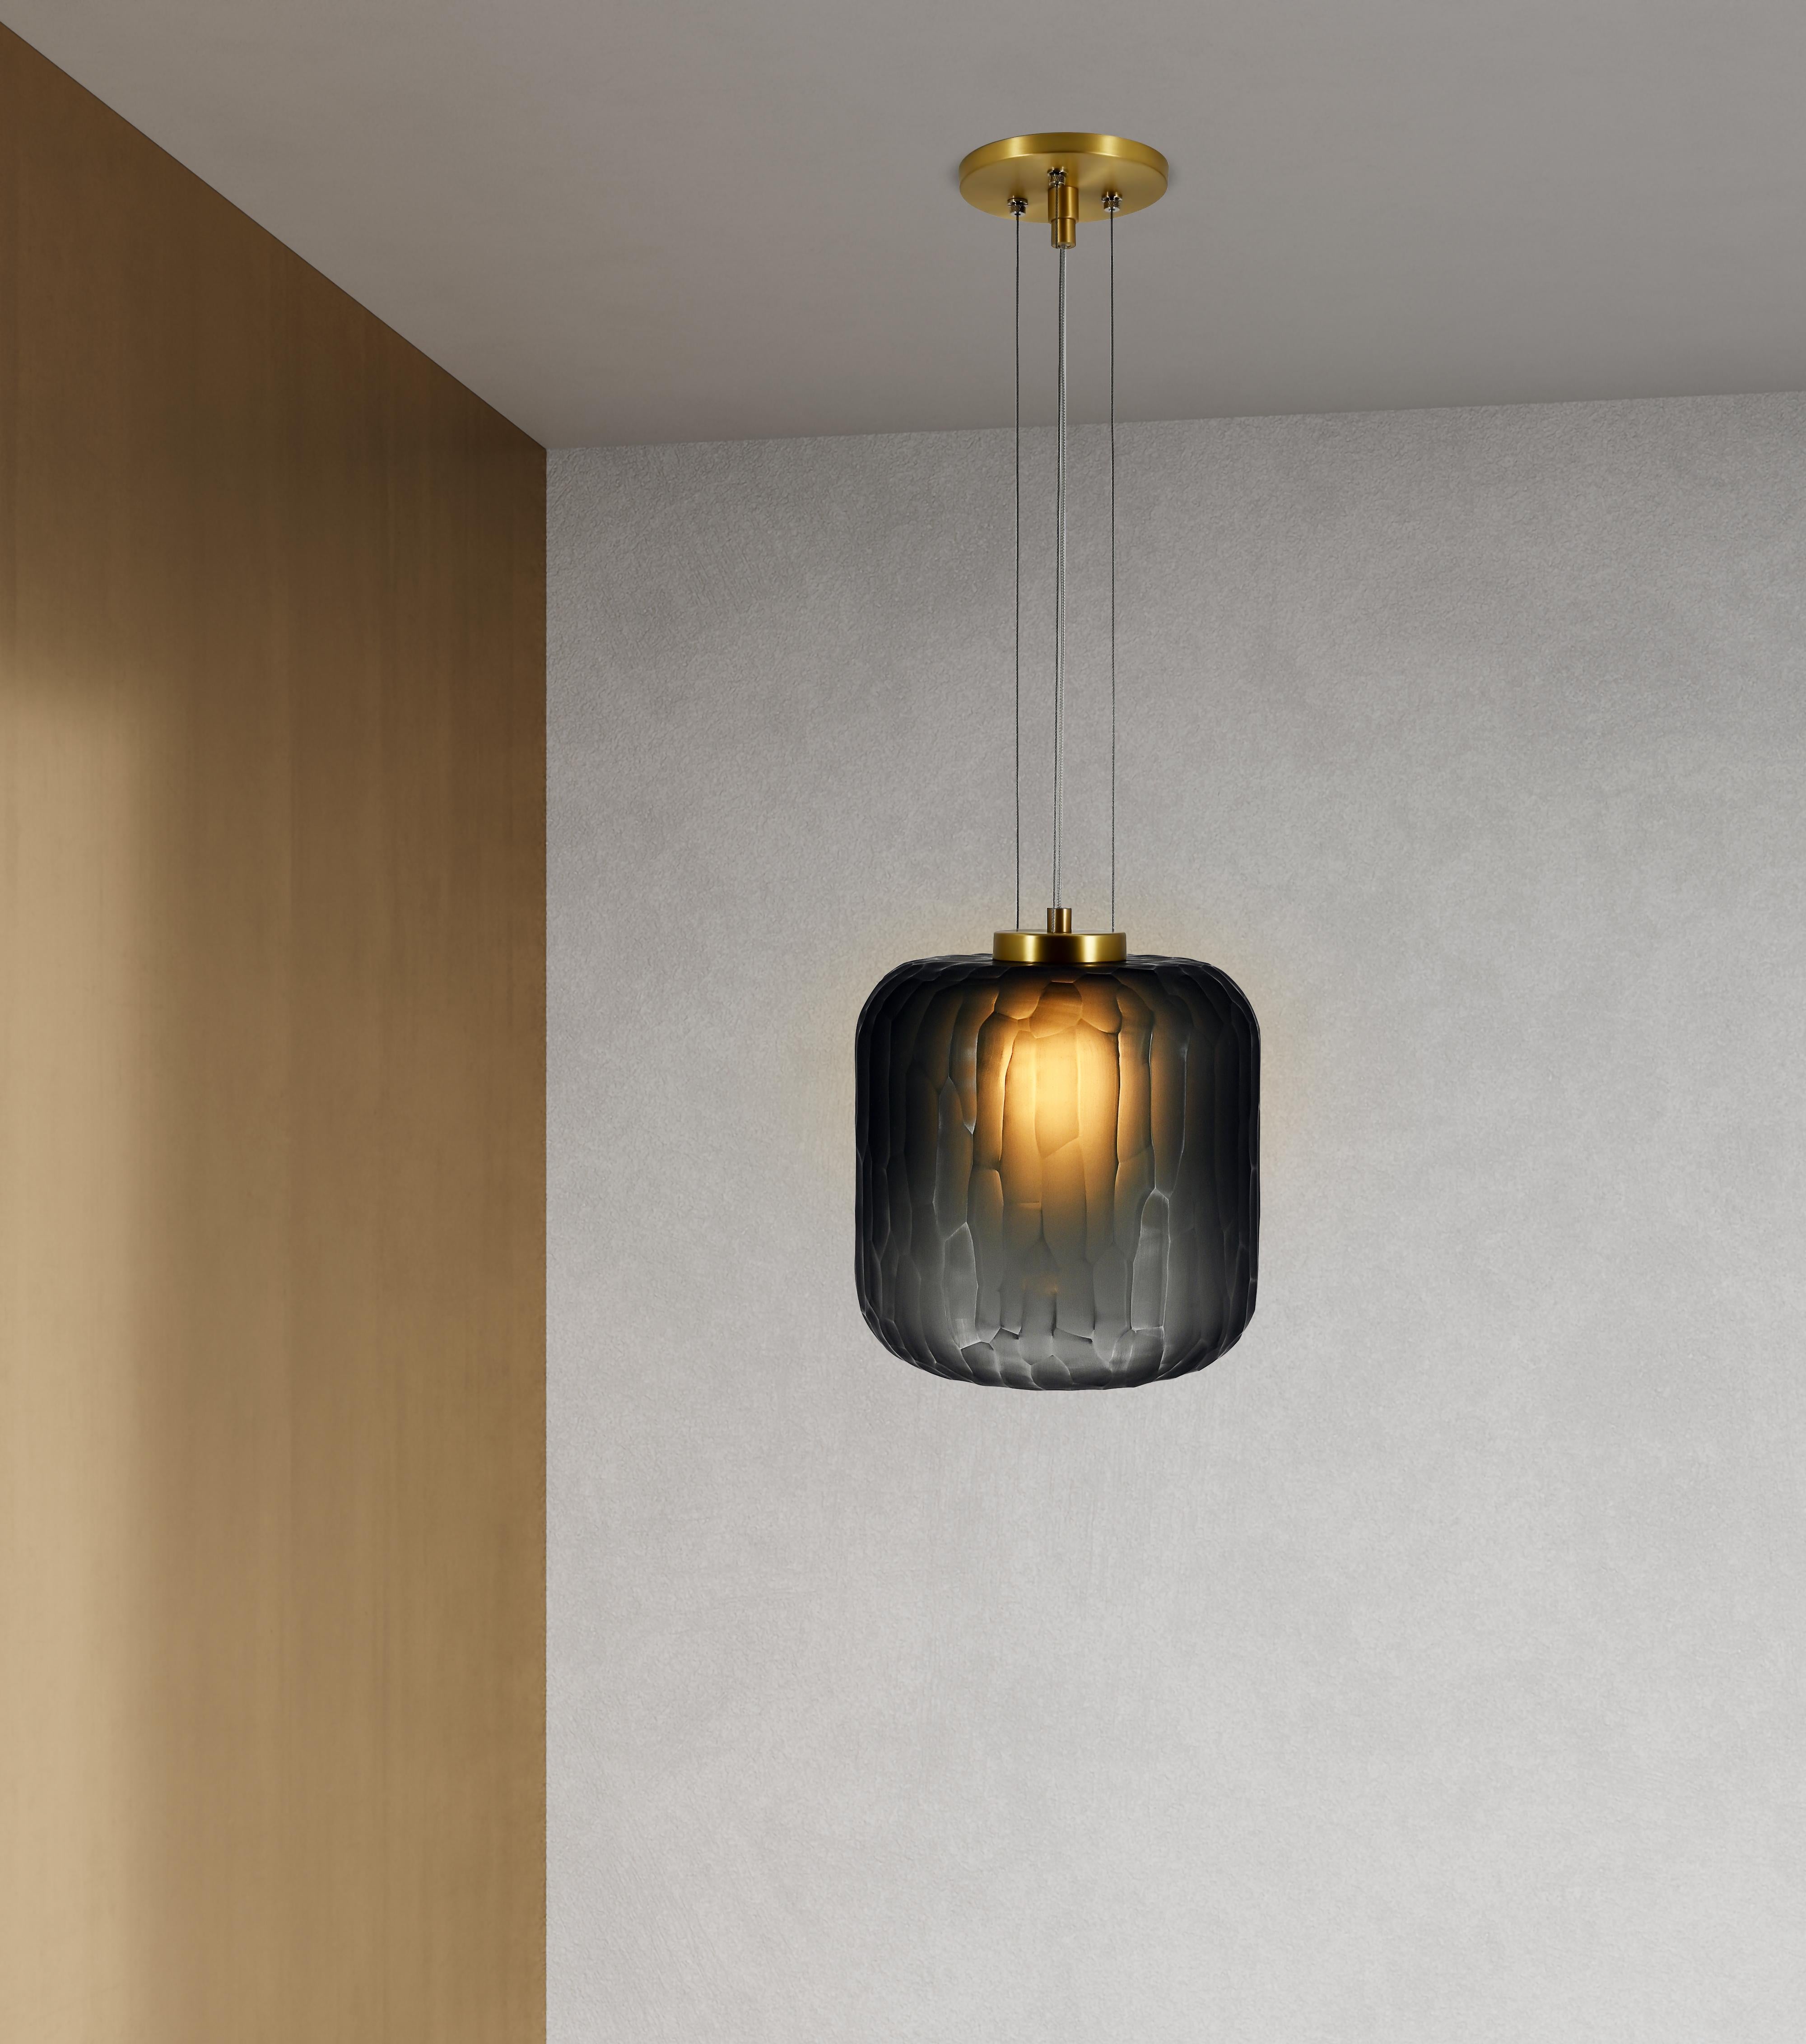 The Shereen Small pendant was designed with the expressive elegance of gemstone jewelry in mind. Bold, rounded contours with frosted, multifaceted surfaces create a remarkably exquisite sculptural piece with a rich, modern touch. Each piece is